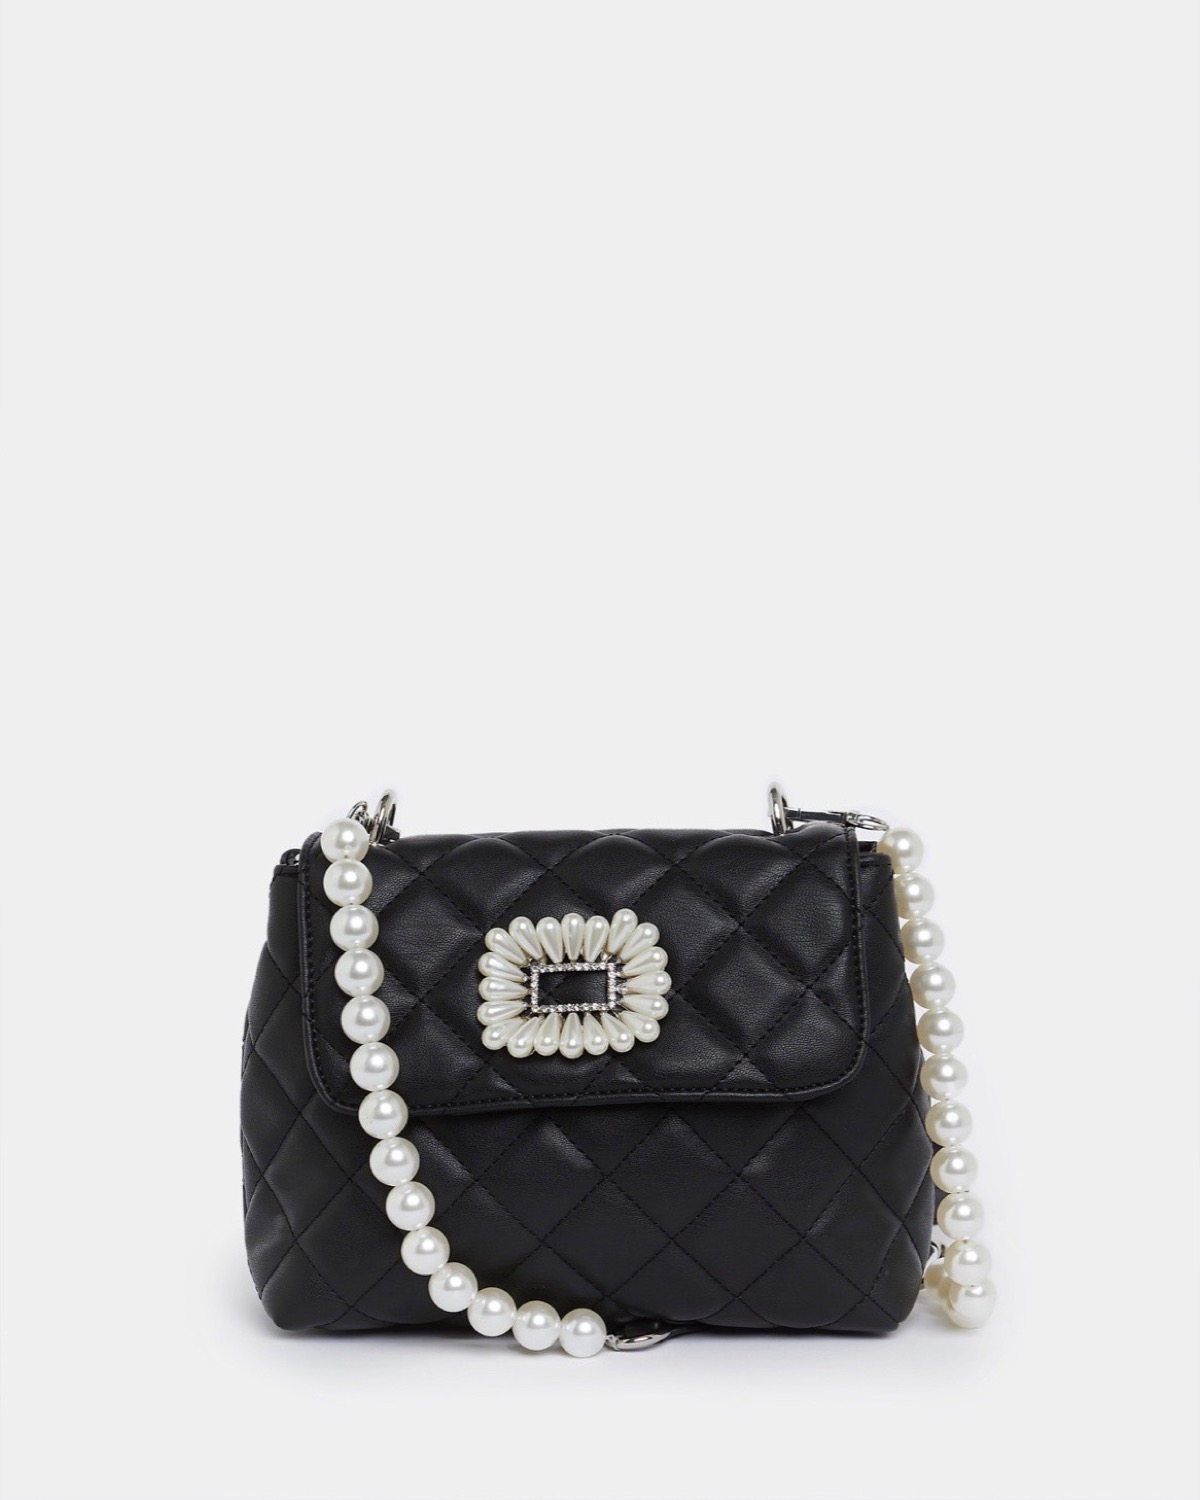 CHANEL Lambskin Quilted CC To Drink Water Bottle Black Gold, FASHIONPHILE